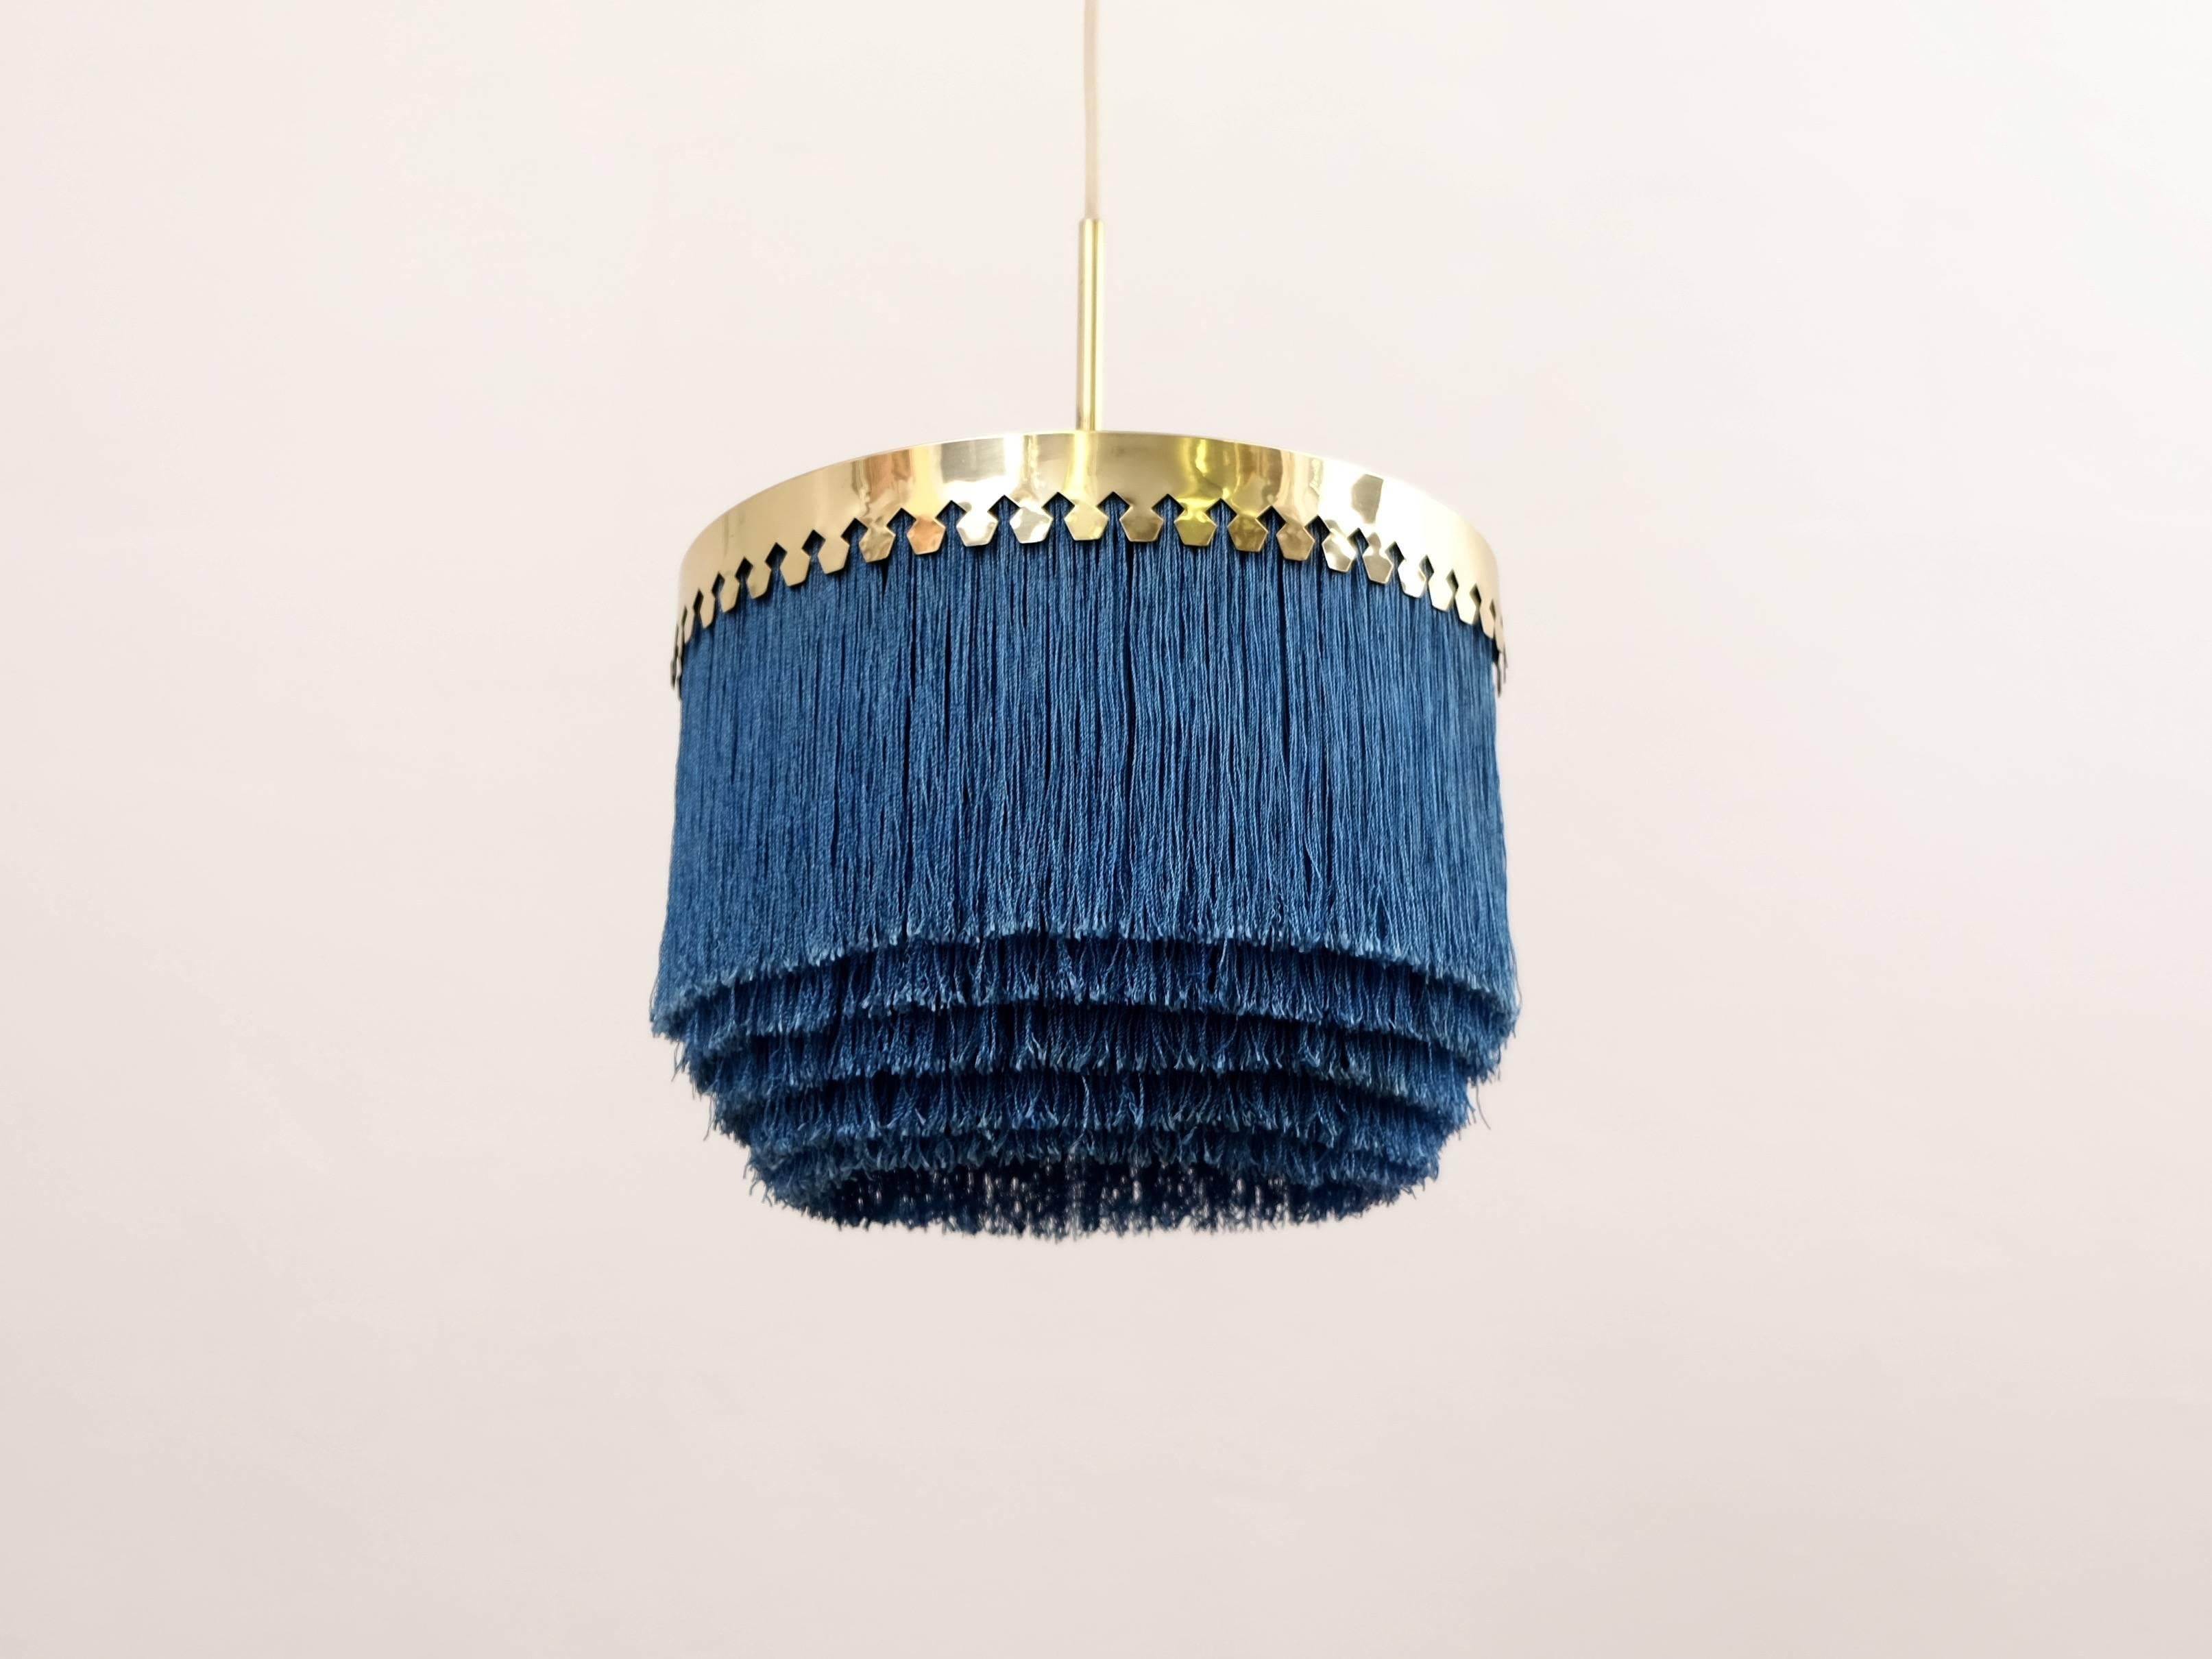 Hans-Agne Jakobsson Ceiling Lamp Model T601/M, 1960s In Excellent Condition For Sale In Stockholm, SE